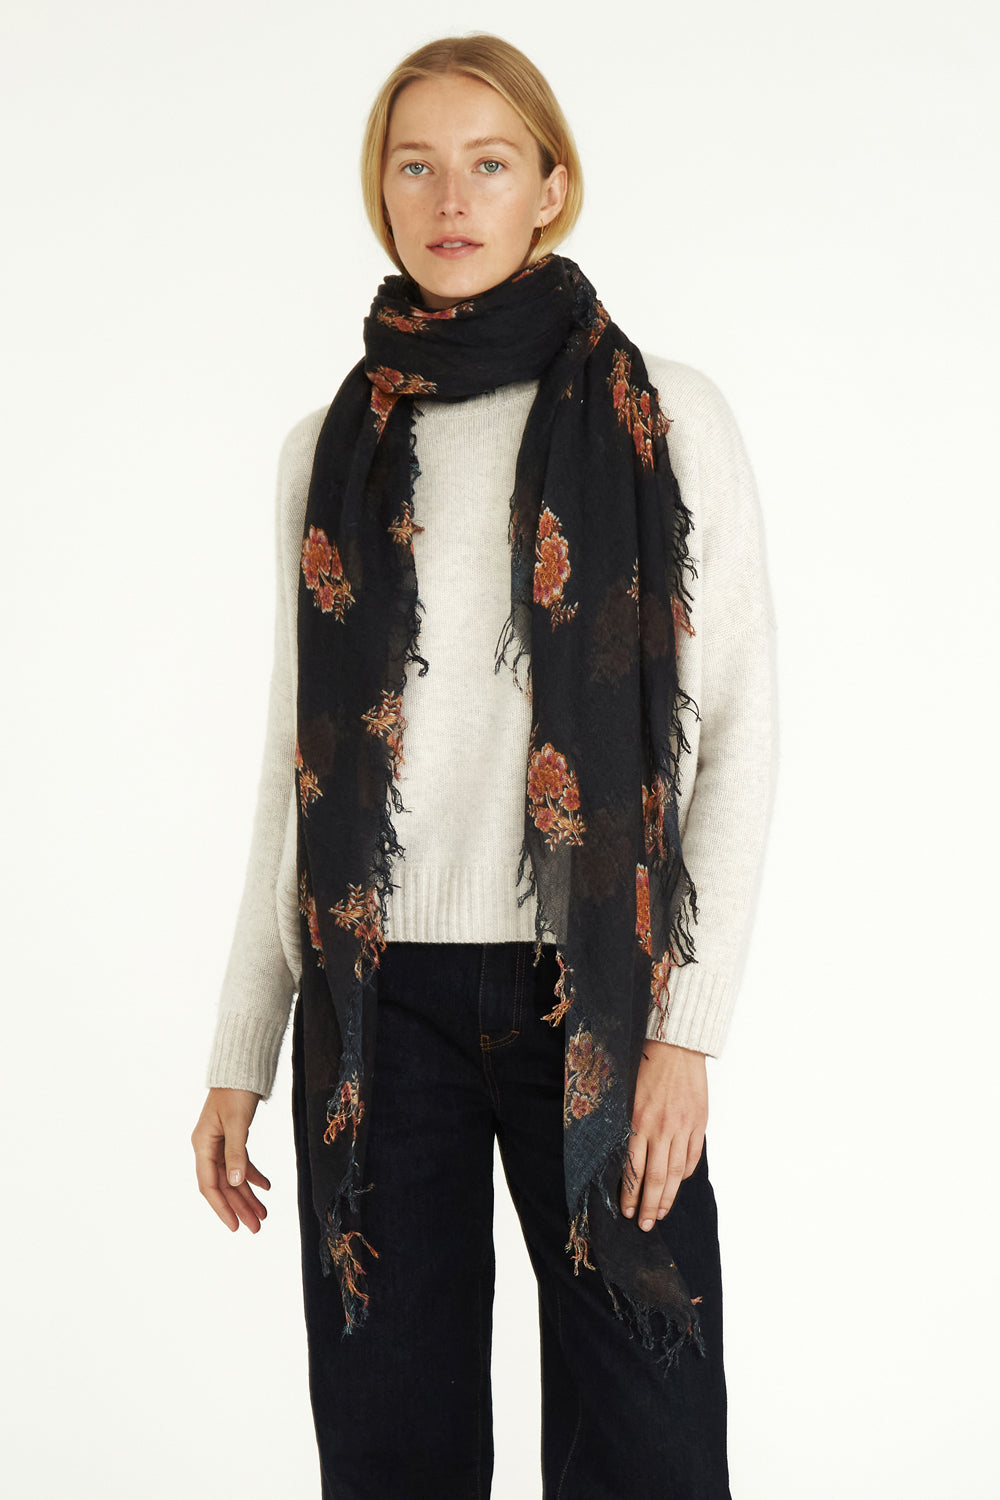 CASHMERE FLORAL SCARF - PAGEANT BLUE - Kingfisher Road - Online Boutique